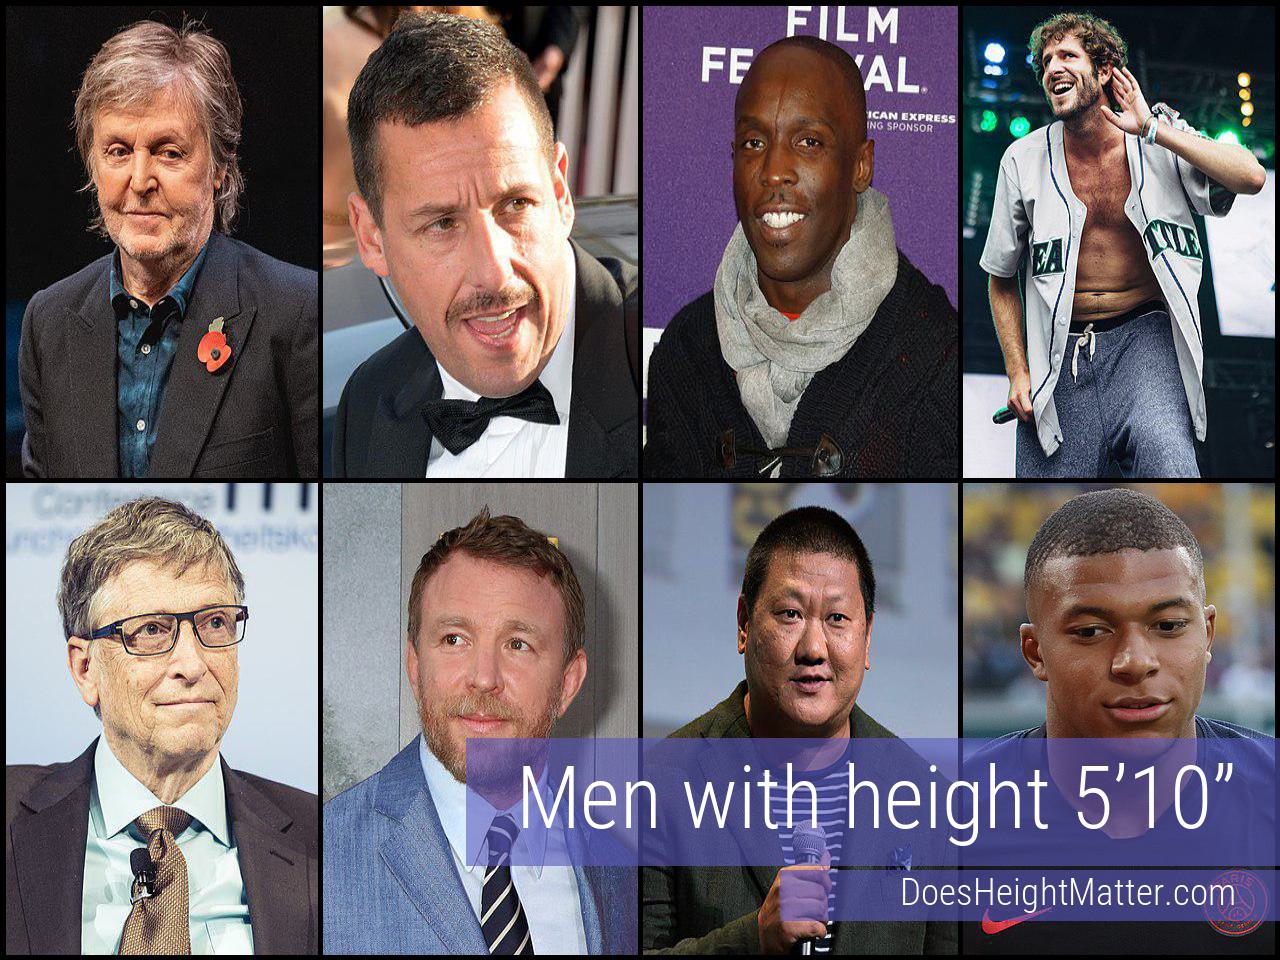 Male celebrities who are 5 ft 10